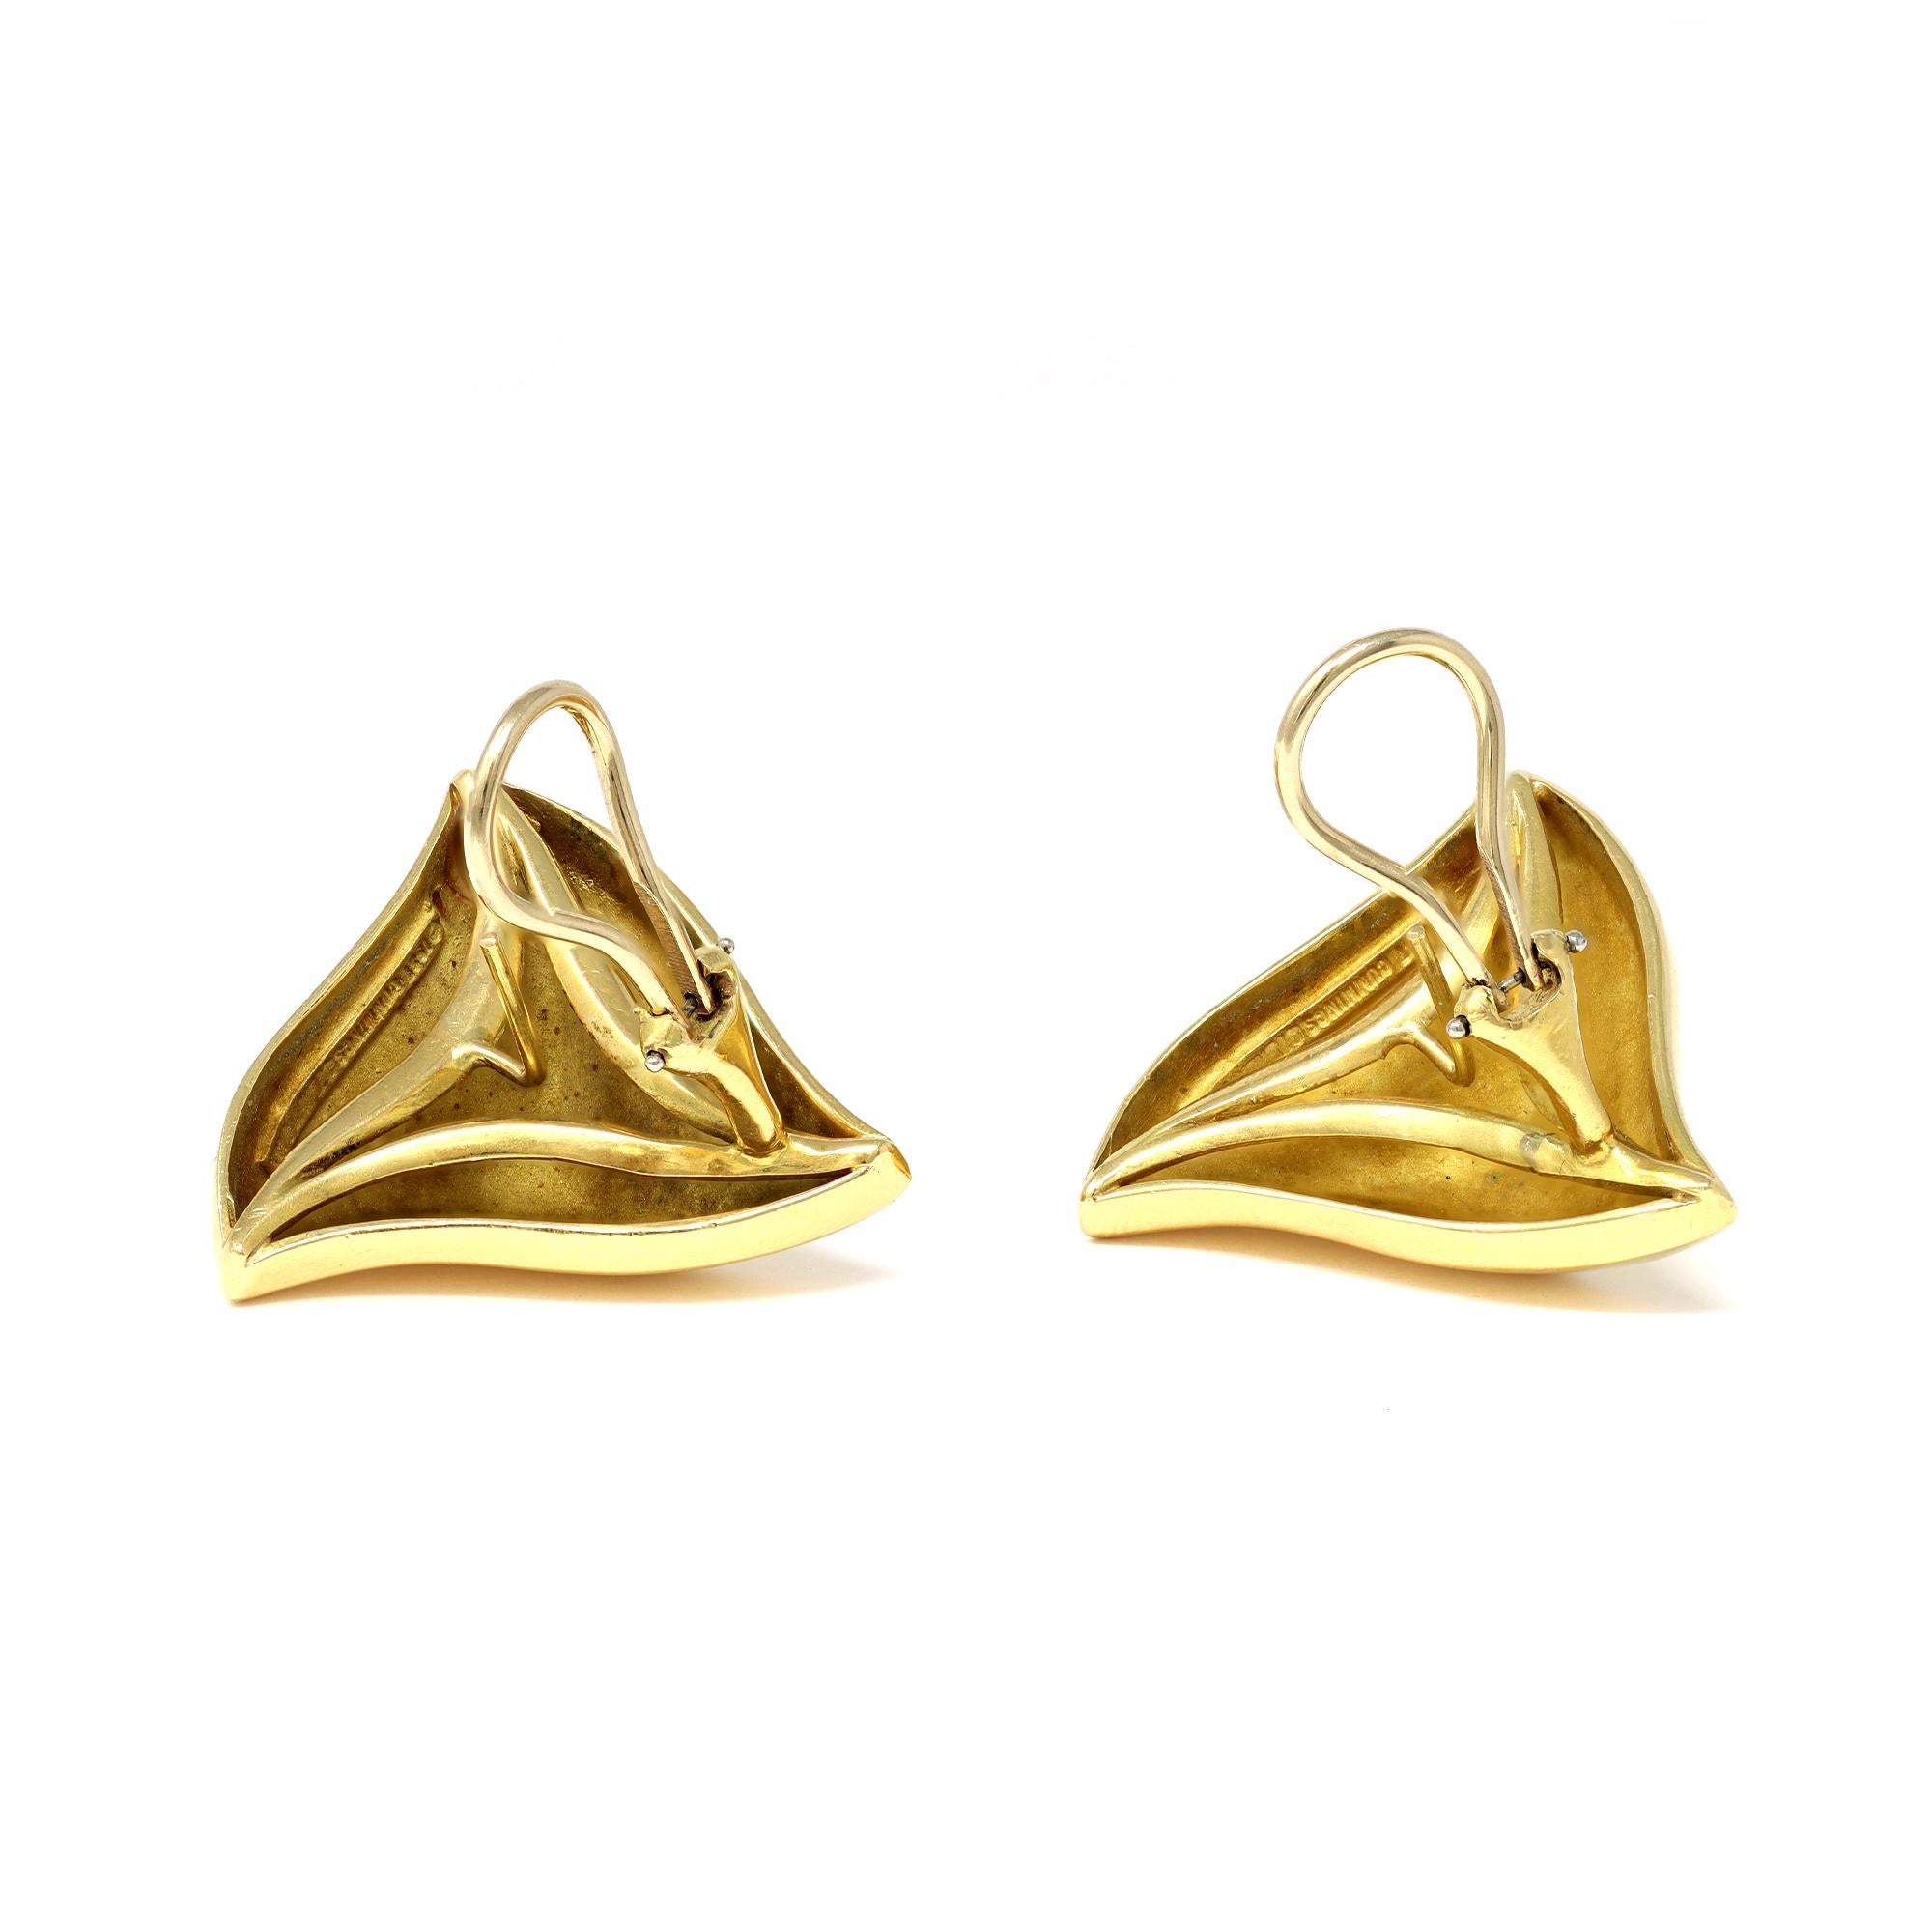 Modern Signed Angela Cummings Pyramidal Clip On Earrings in 18 Karat Yellow Gold For Sale